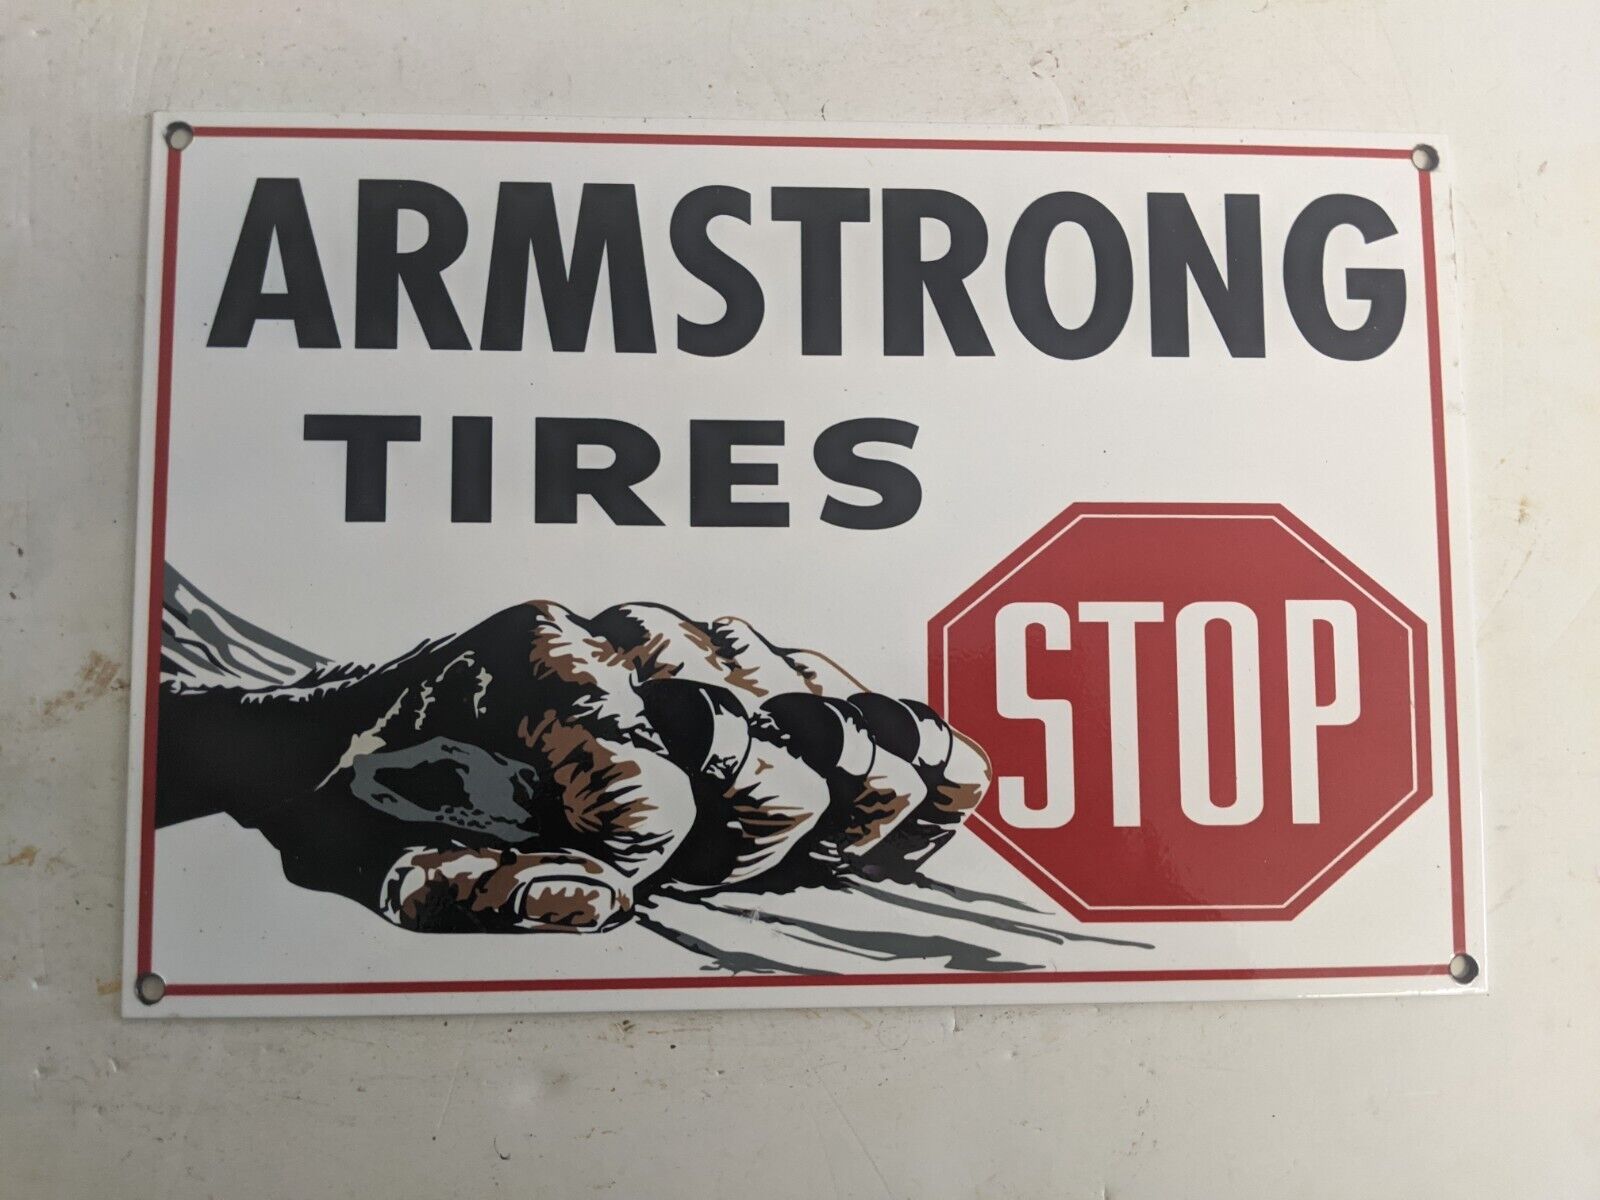 OLD VINTAGE ARMSTRONG TIRES PORCELAIN ADVERTISING SIGN WHEELS TIRE